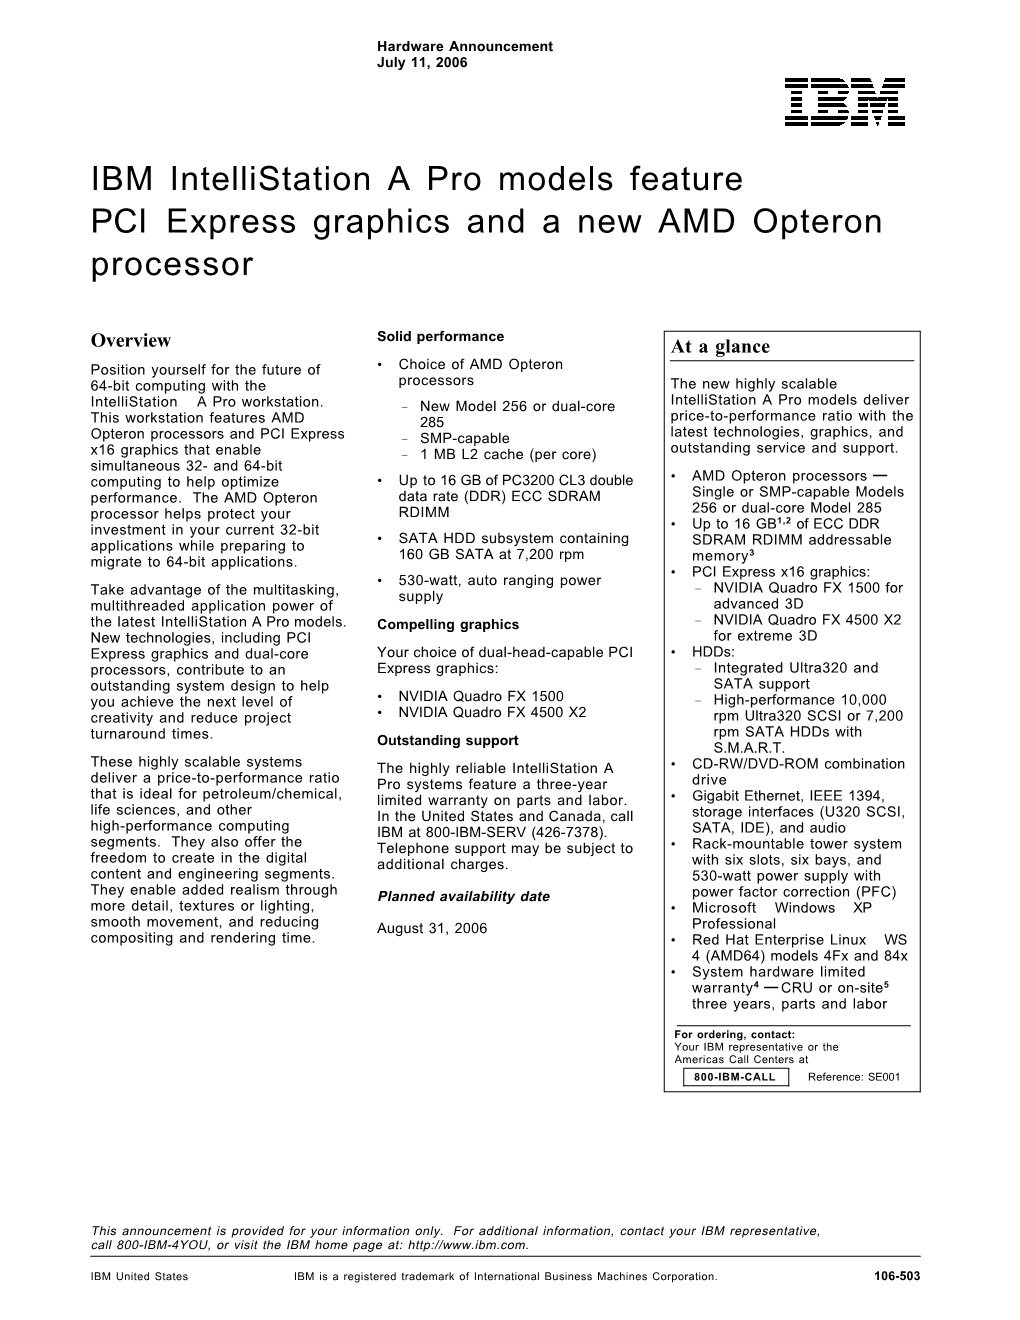 IBM Intellistation a Pro Models Feature PCI Express Graphics and a New AMD Opteron Processor